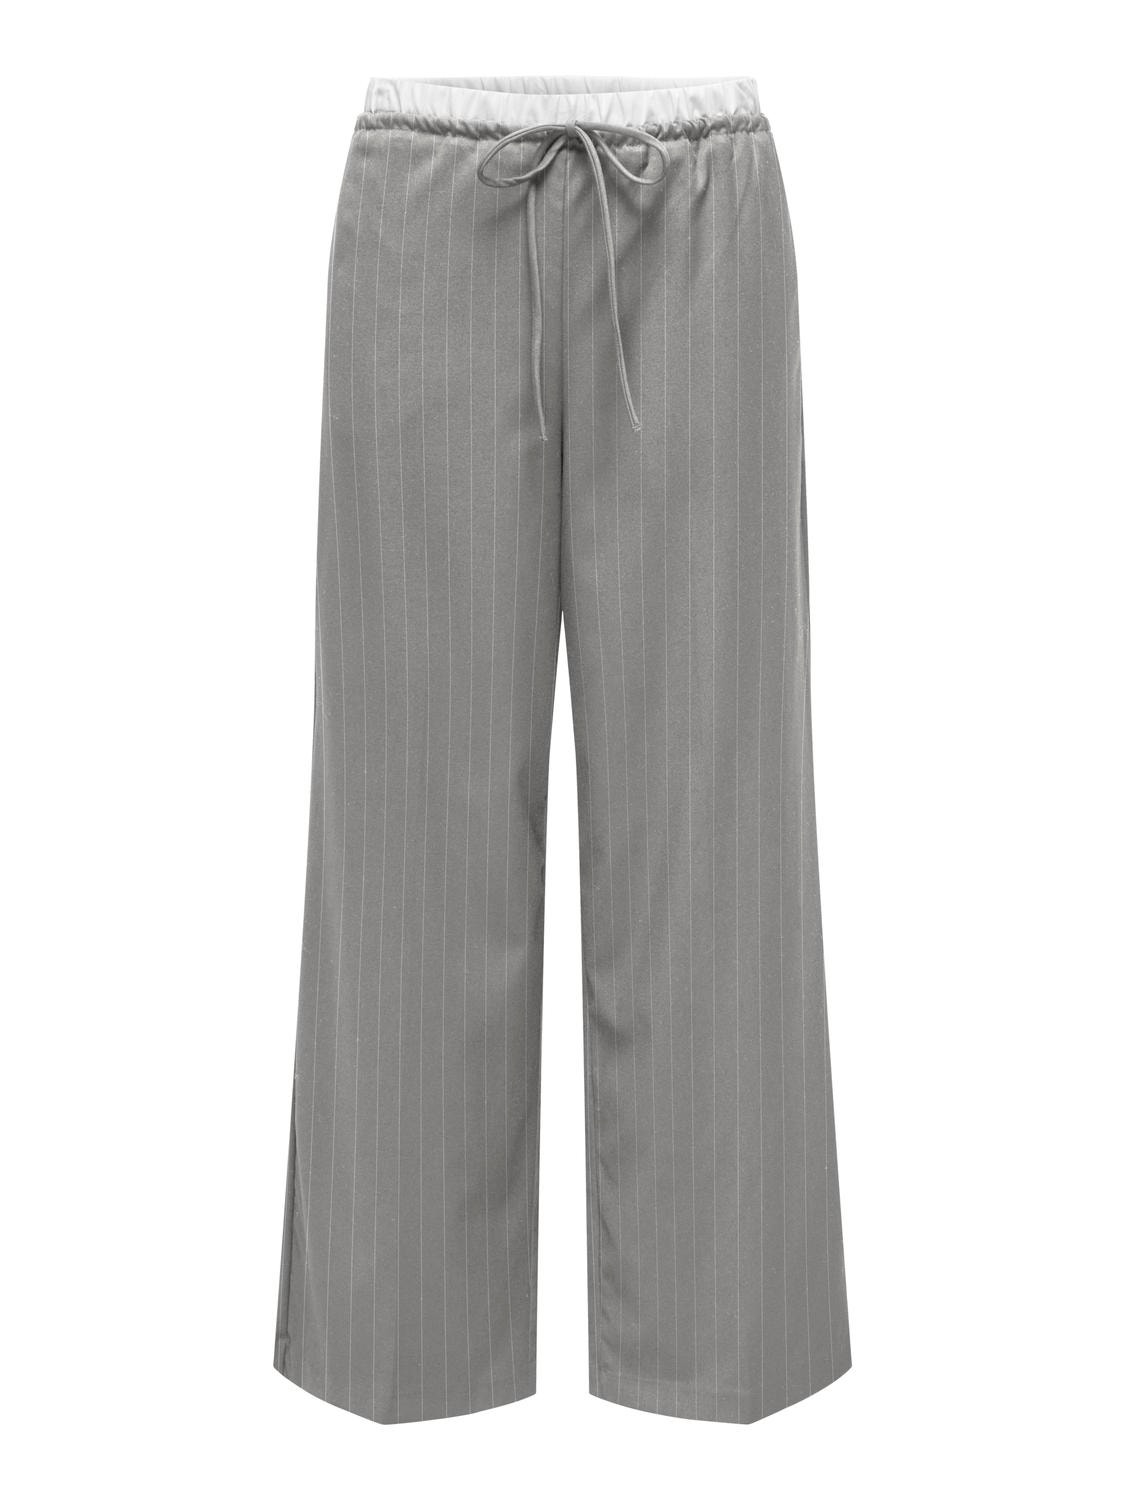 ONLY Straight Fit High waist Trousers -Light Grey Melange - 15339242